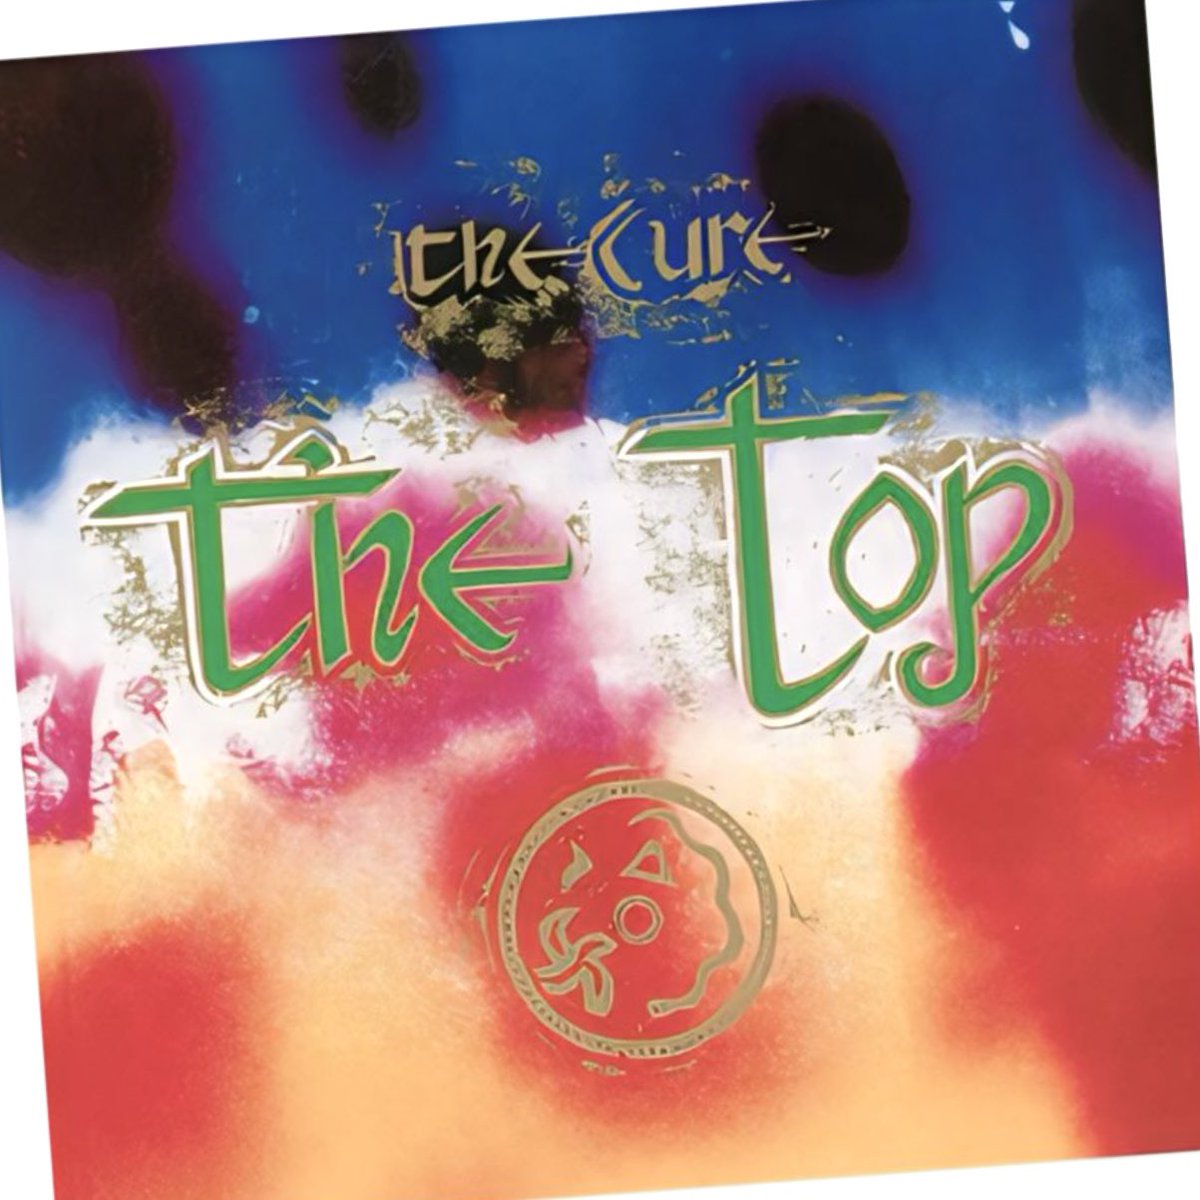 40 years ago today 

4 May 1984

The Cure
The Top

@NewWaveAndPunk #TheCure #robertsmith #80s #music #vinylalbum #vinylrecords